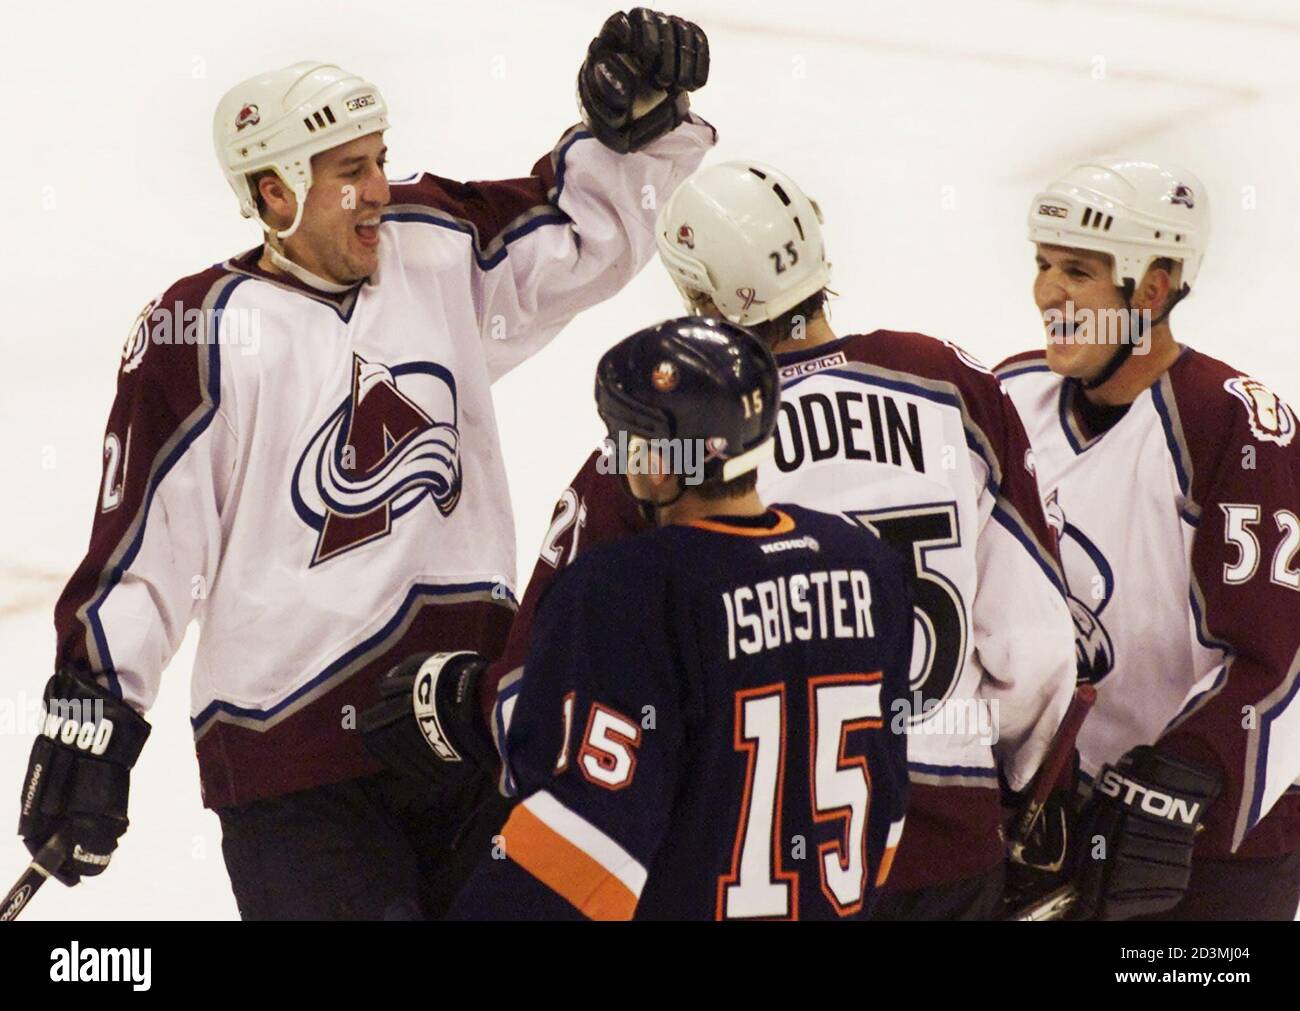 Colorado Avalanche left wing Shjon Podein (C) is congratulated after a goal against the New York Islanders by teammates winger Eric Messier (L) and defenseman Adam Foote during the first period in Denver, November 16, 2001. Islanders winger Brad Isbister (15) skates past the celebration. REUTERS/Gary C. Caskey  GCC/HK Stock Photo